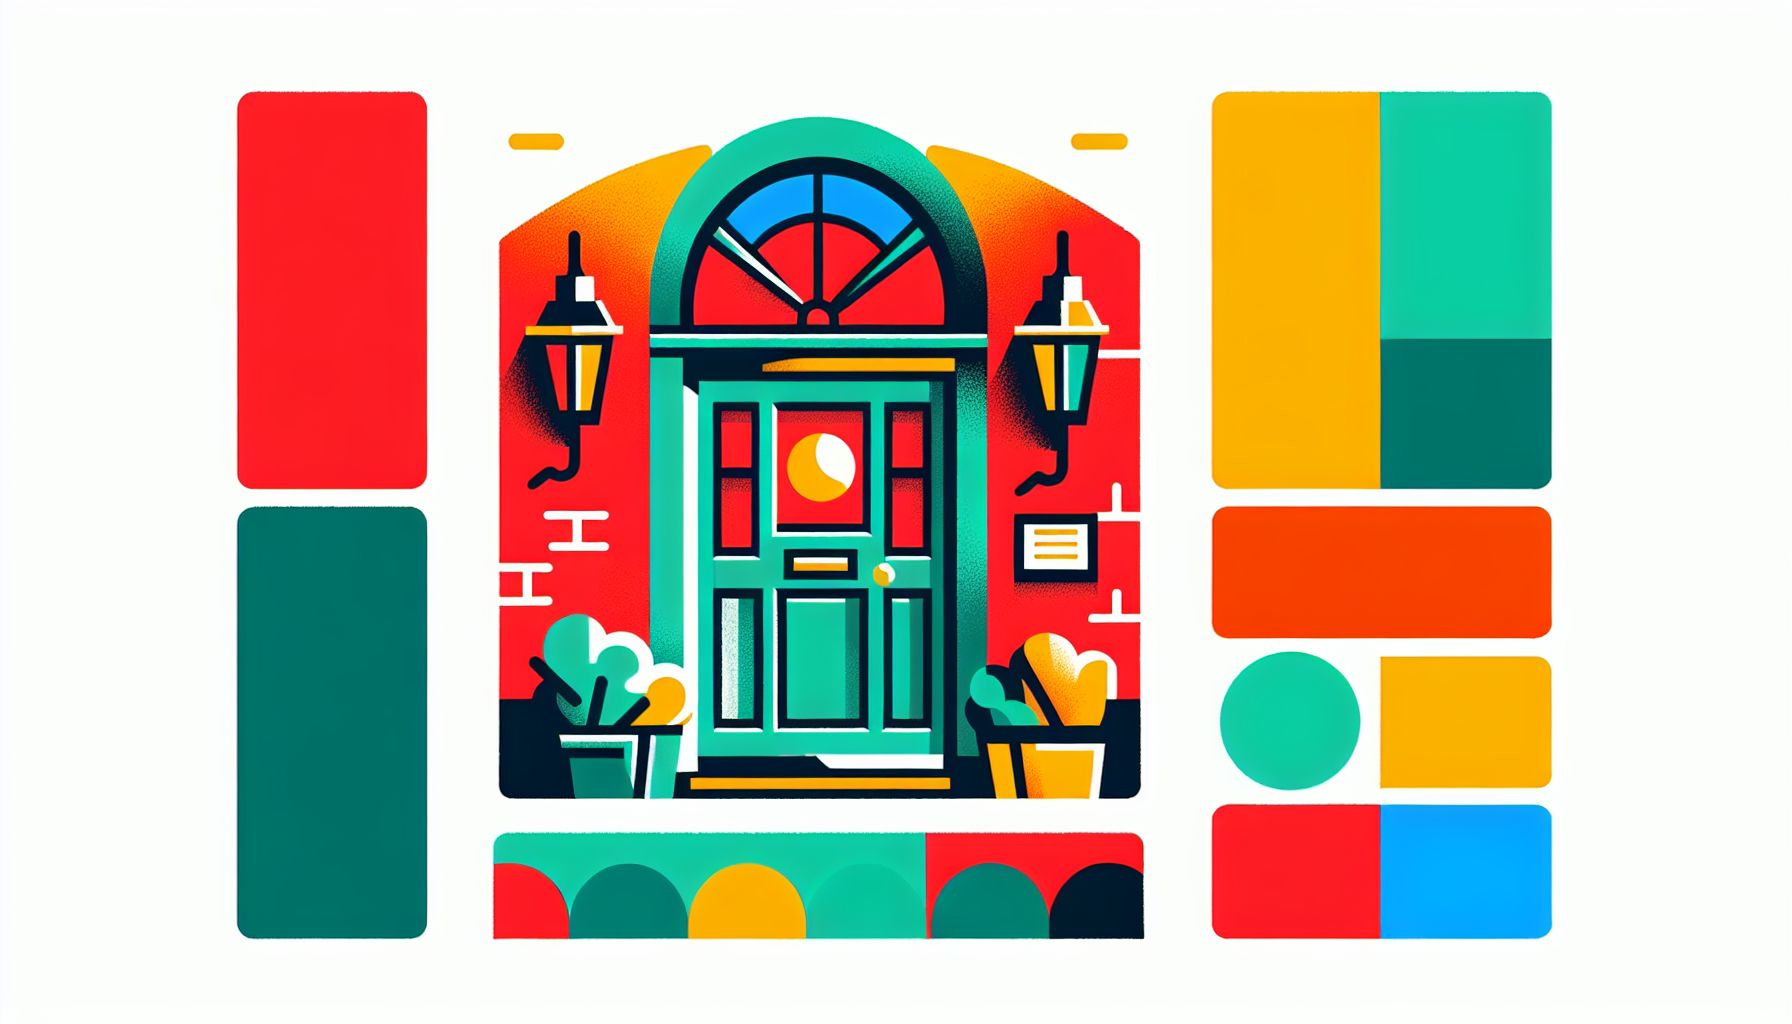 Door in flat illustration style and white background, red #f47574, green #88c7a8, yellow #fcc44b, and blue #645bc8 colors.